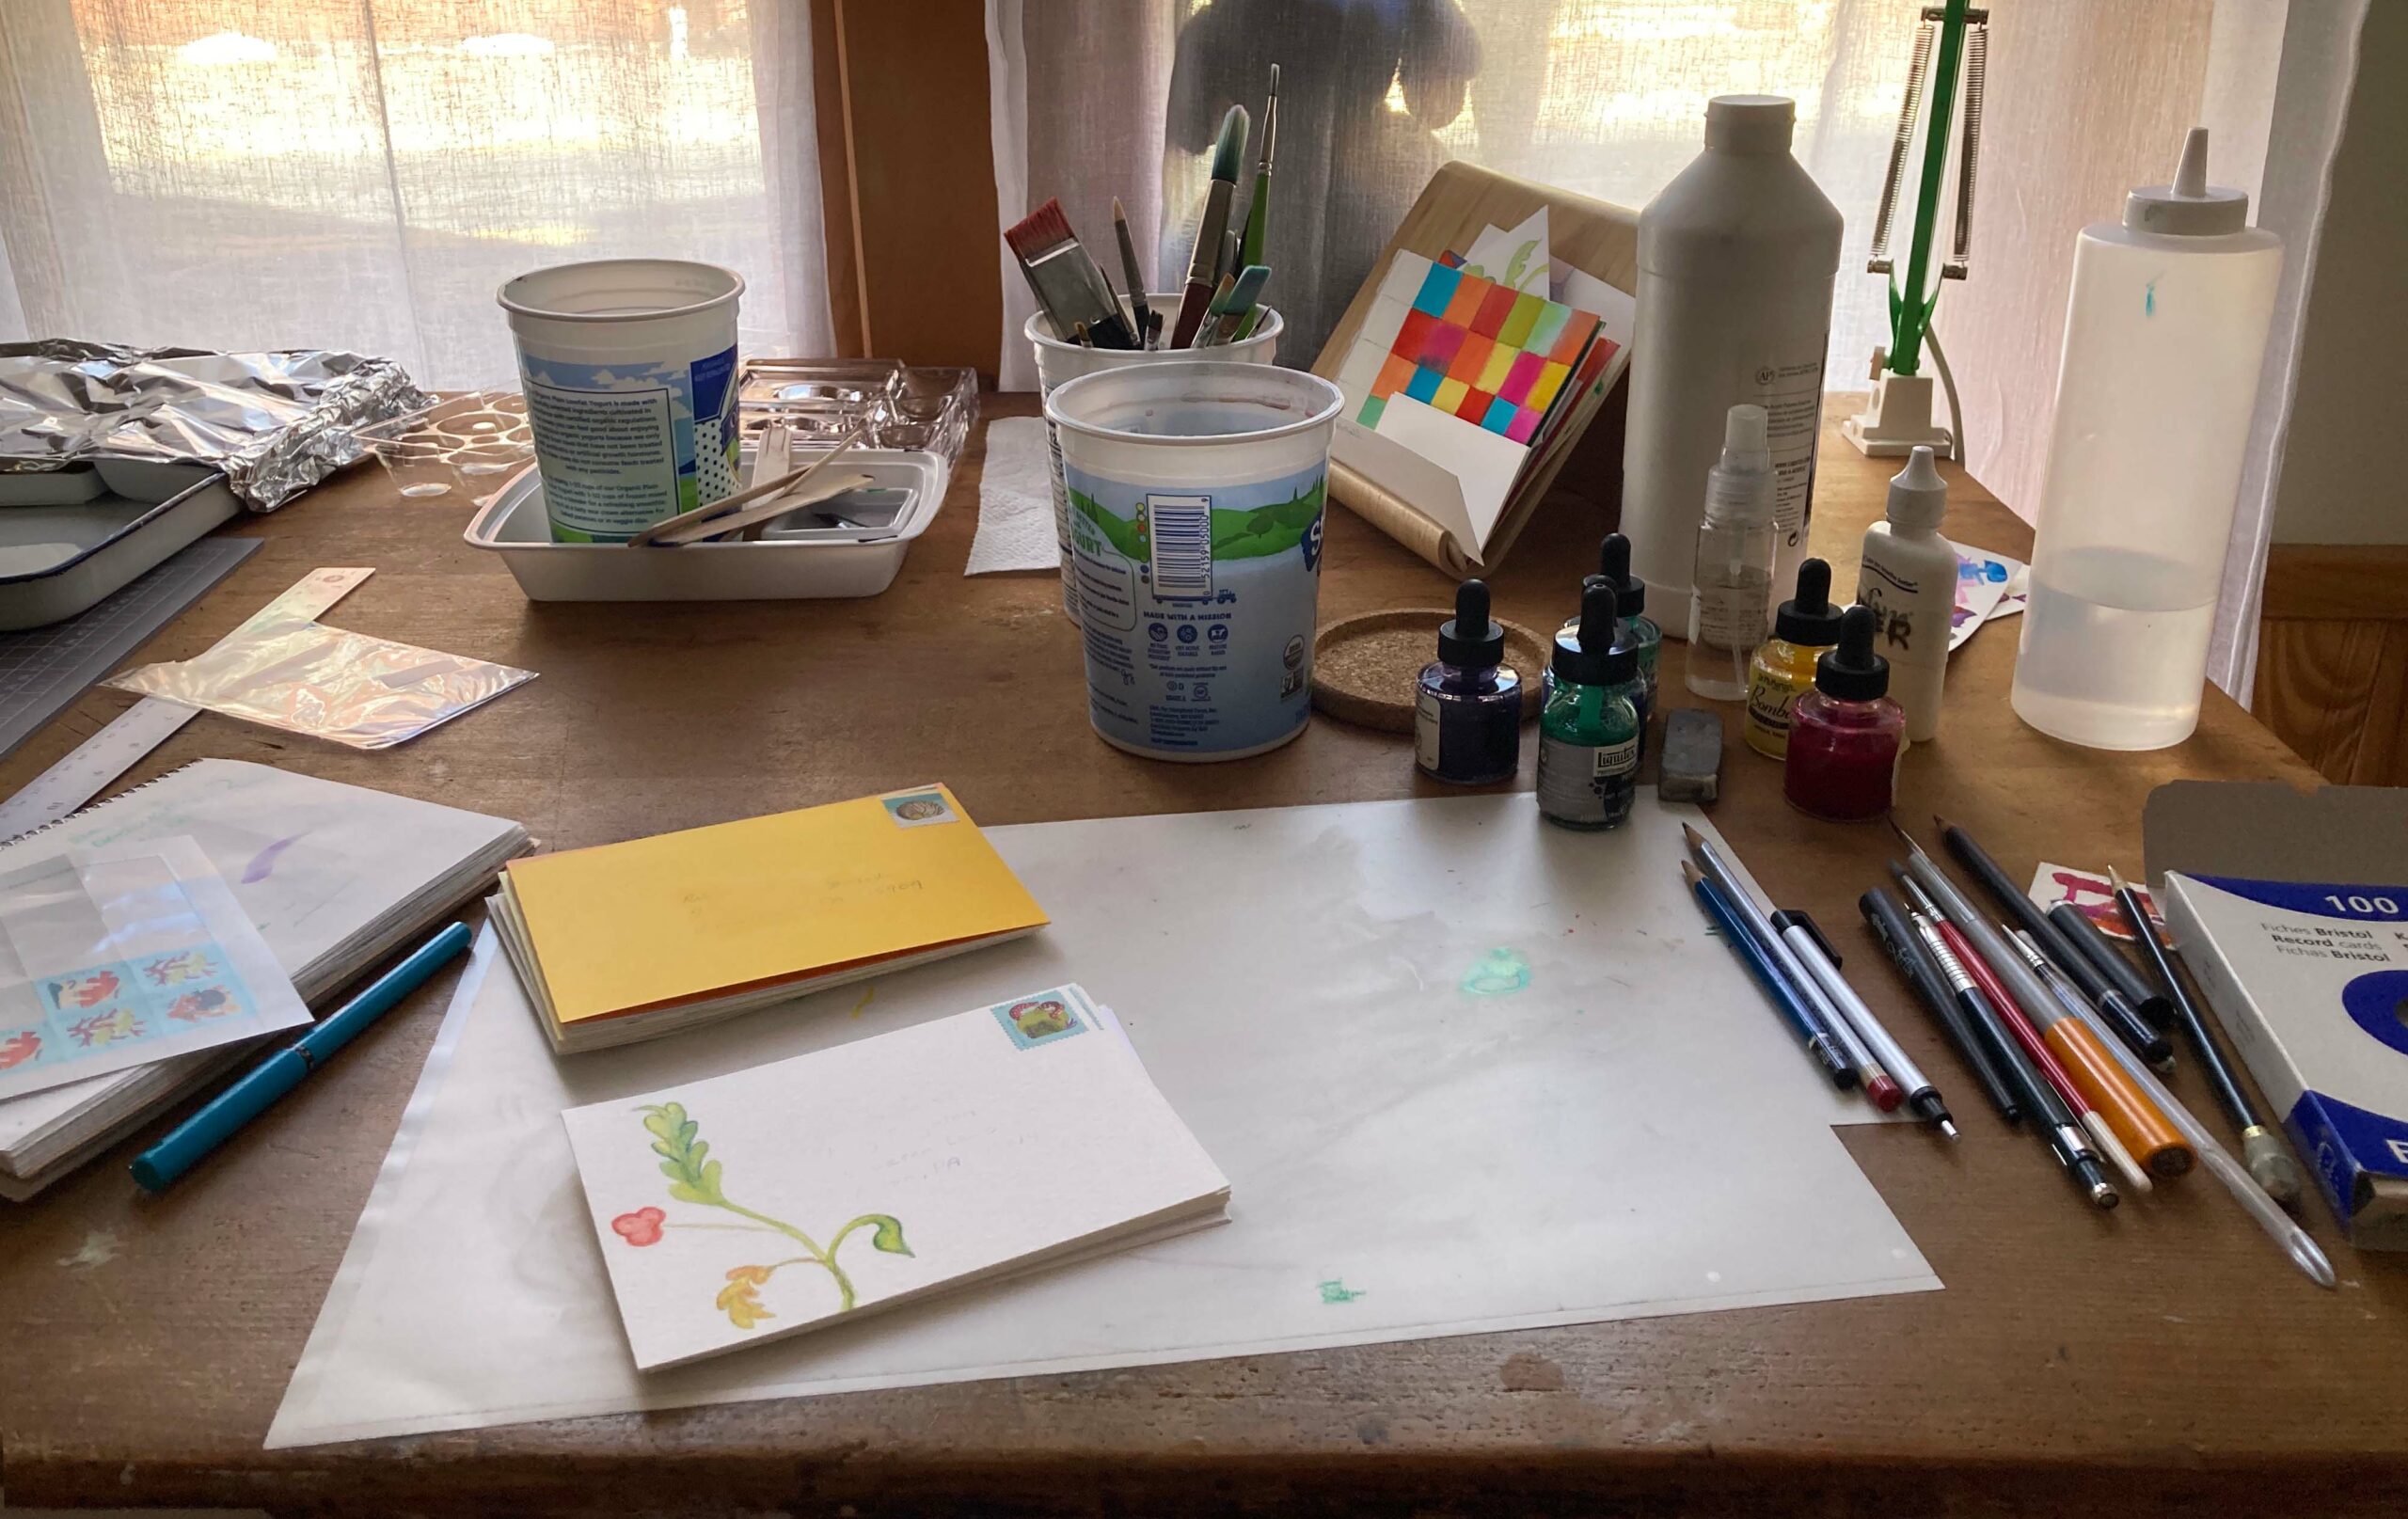 Work table with two stacks of postcards, stamp sheet, paintbrushes, drawing tools, ink bottles, and a jug of gesso. The cards have been addressed but the information is obscured.